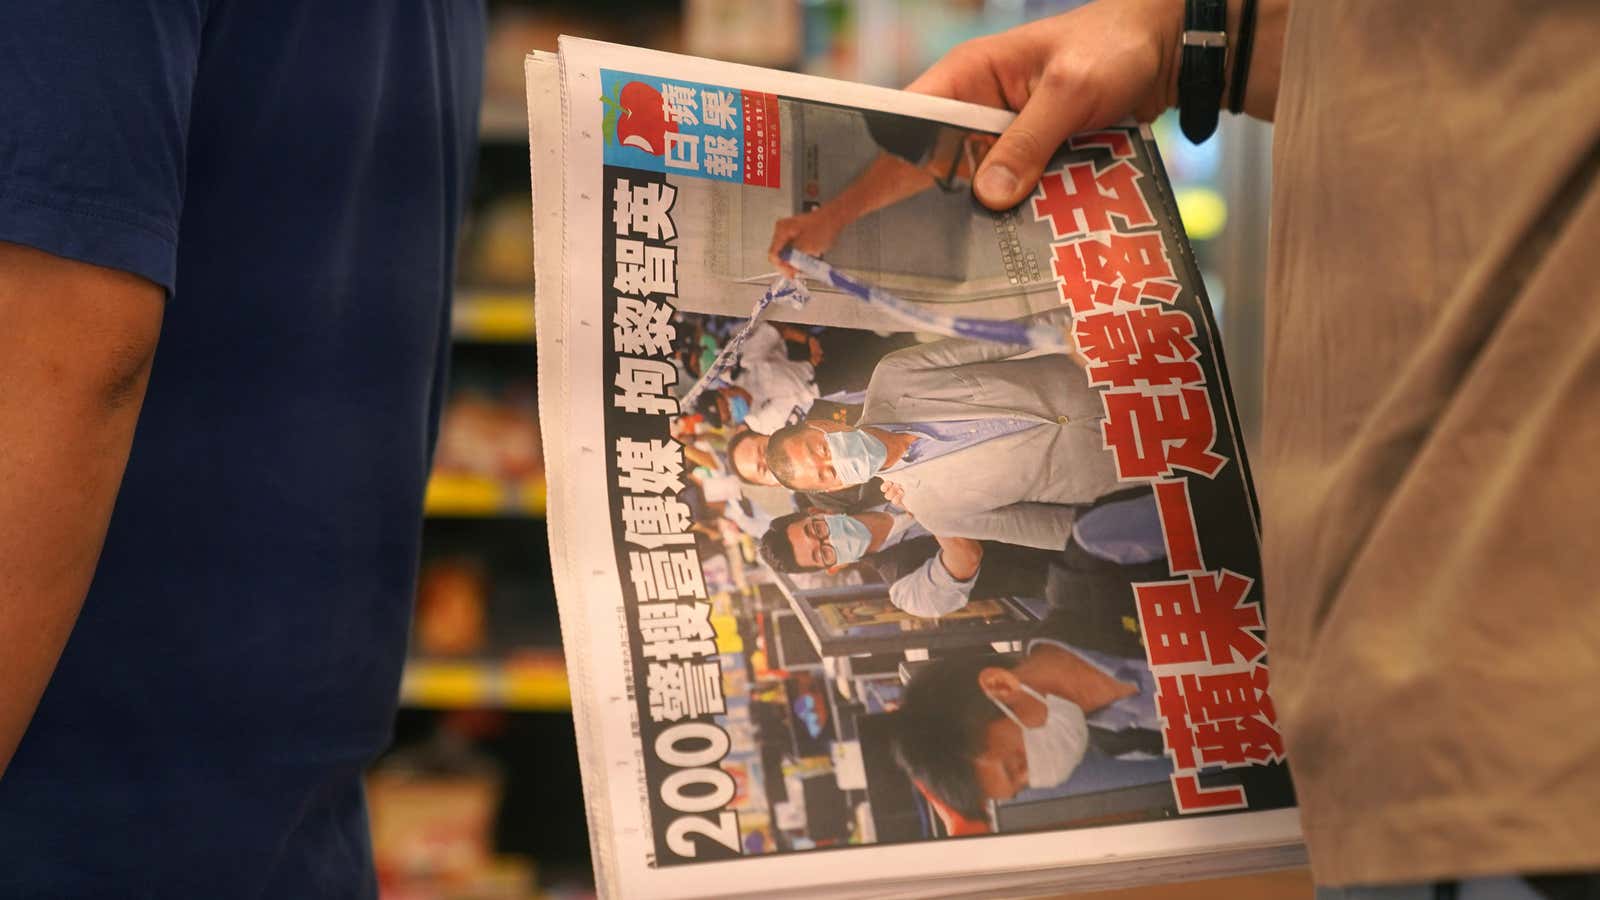 A man waits to pay for a Apple Daily newspaper with the headline “Apple Daily will fight on” after media mogul and founder of Apple…